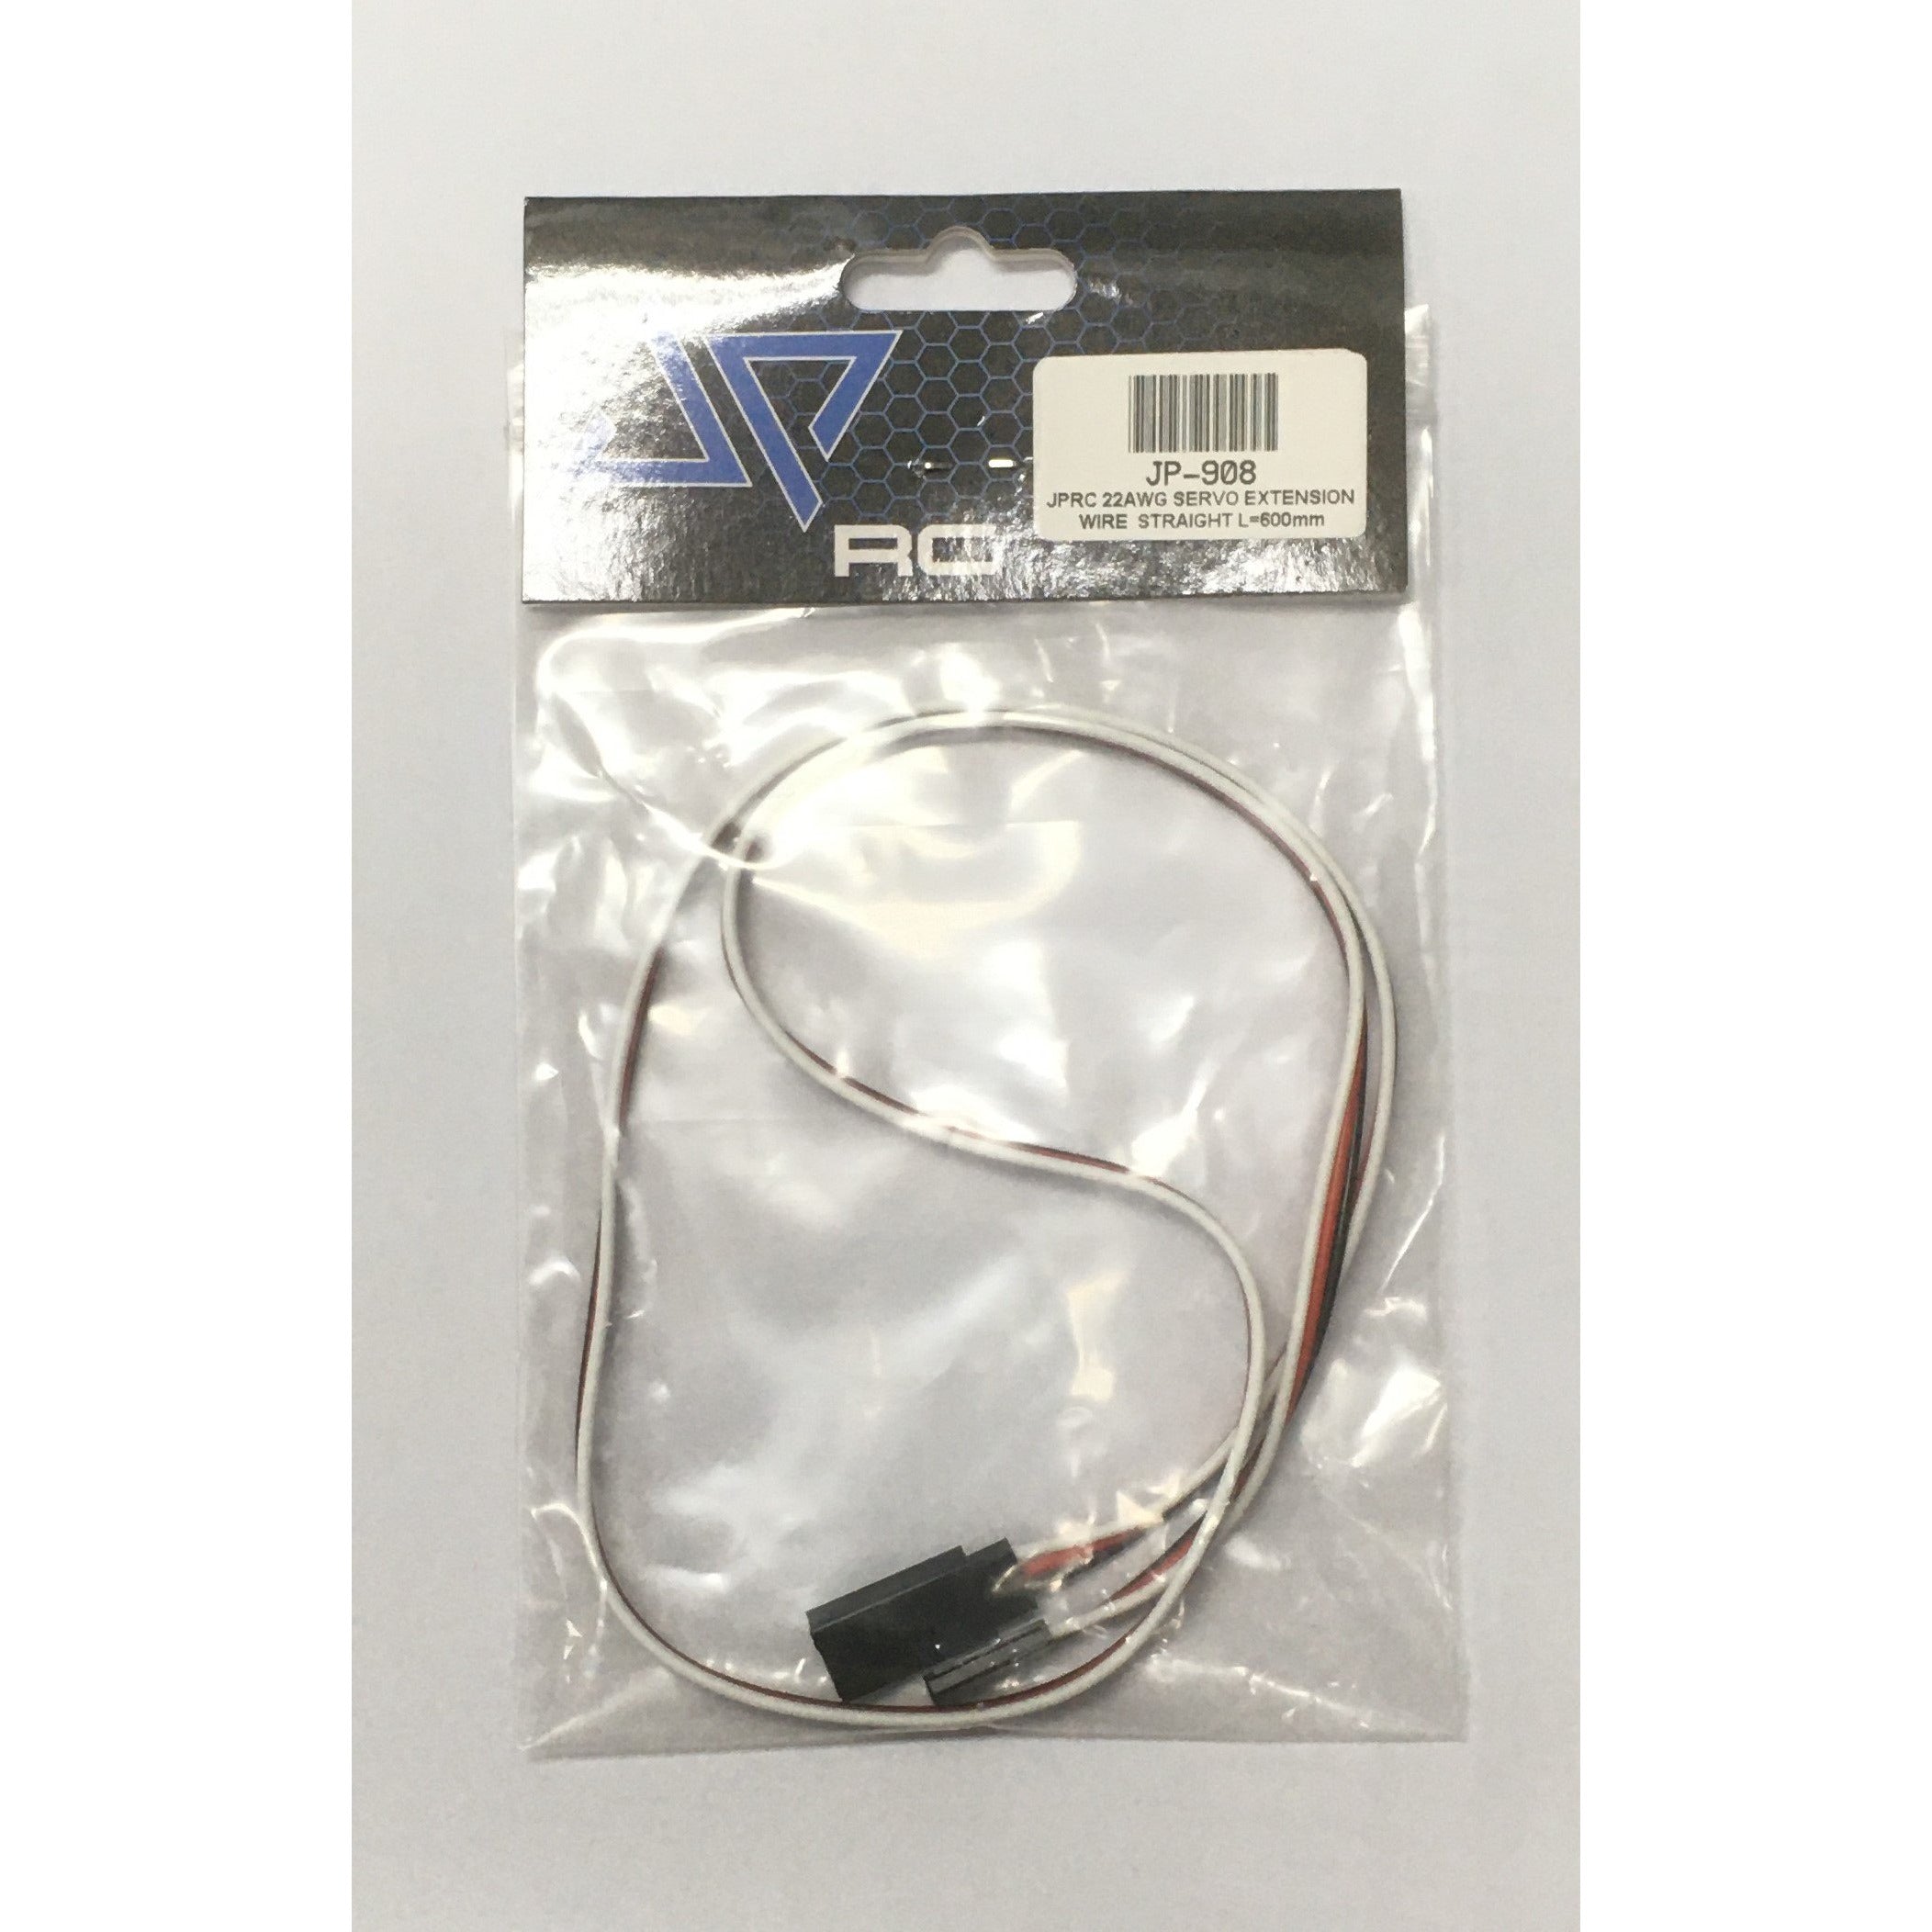 JPRC 22AWG WIRE:Servo Extension Wire Straight 600mm